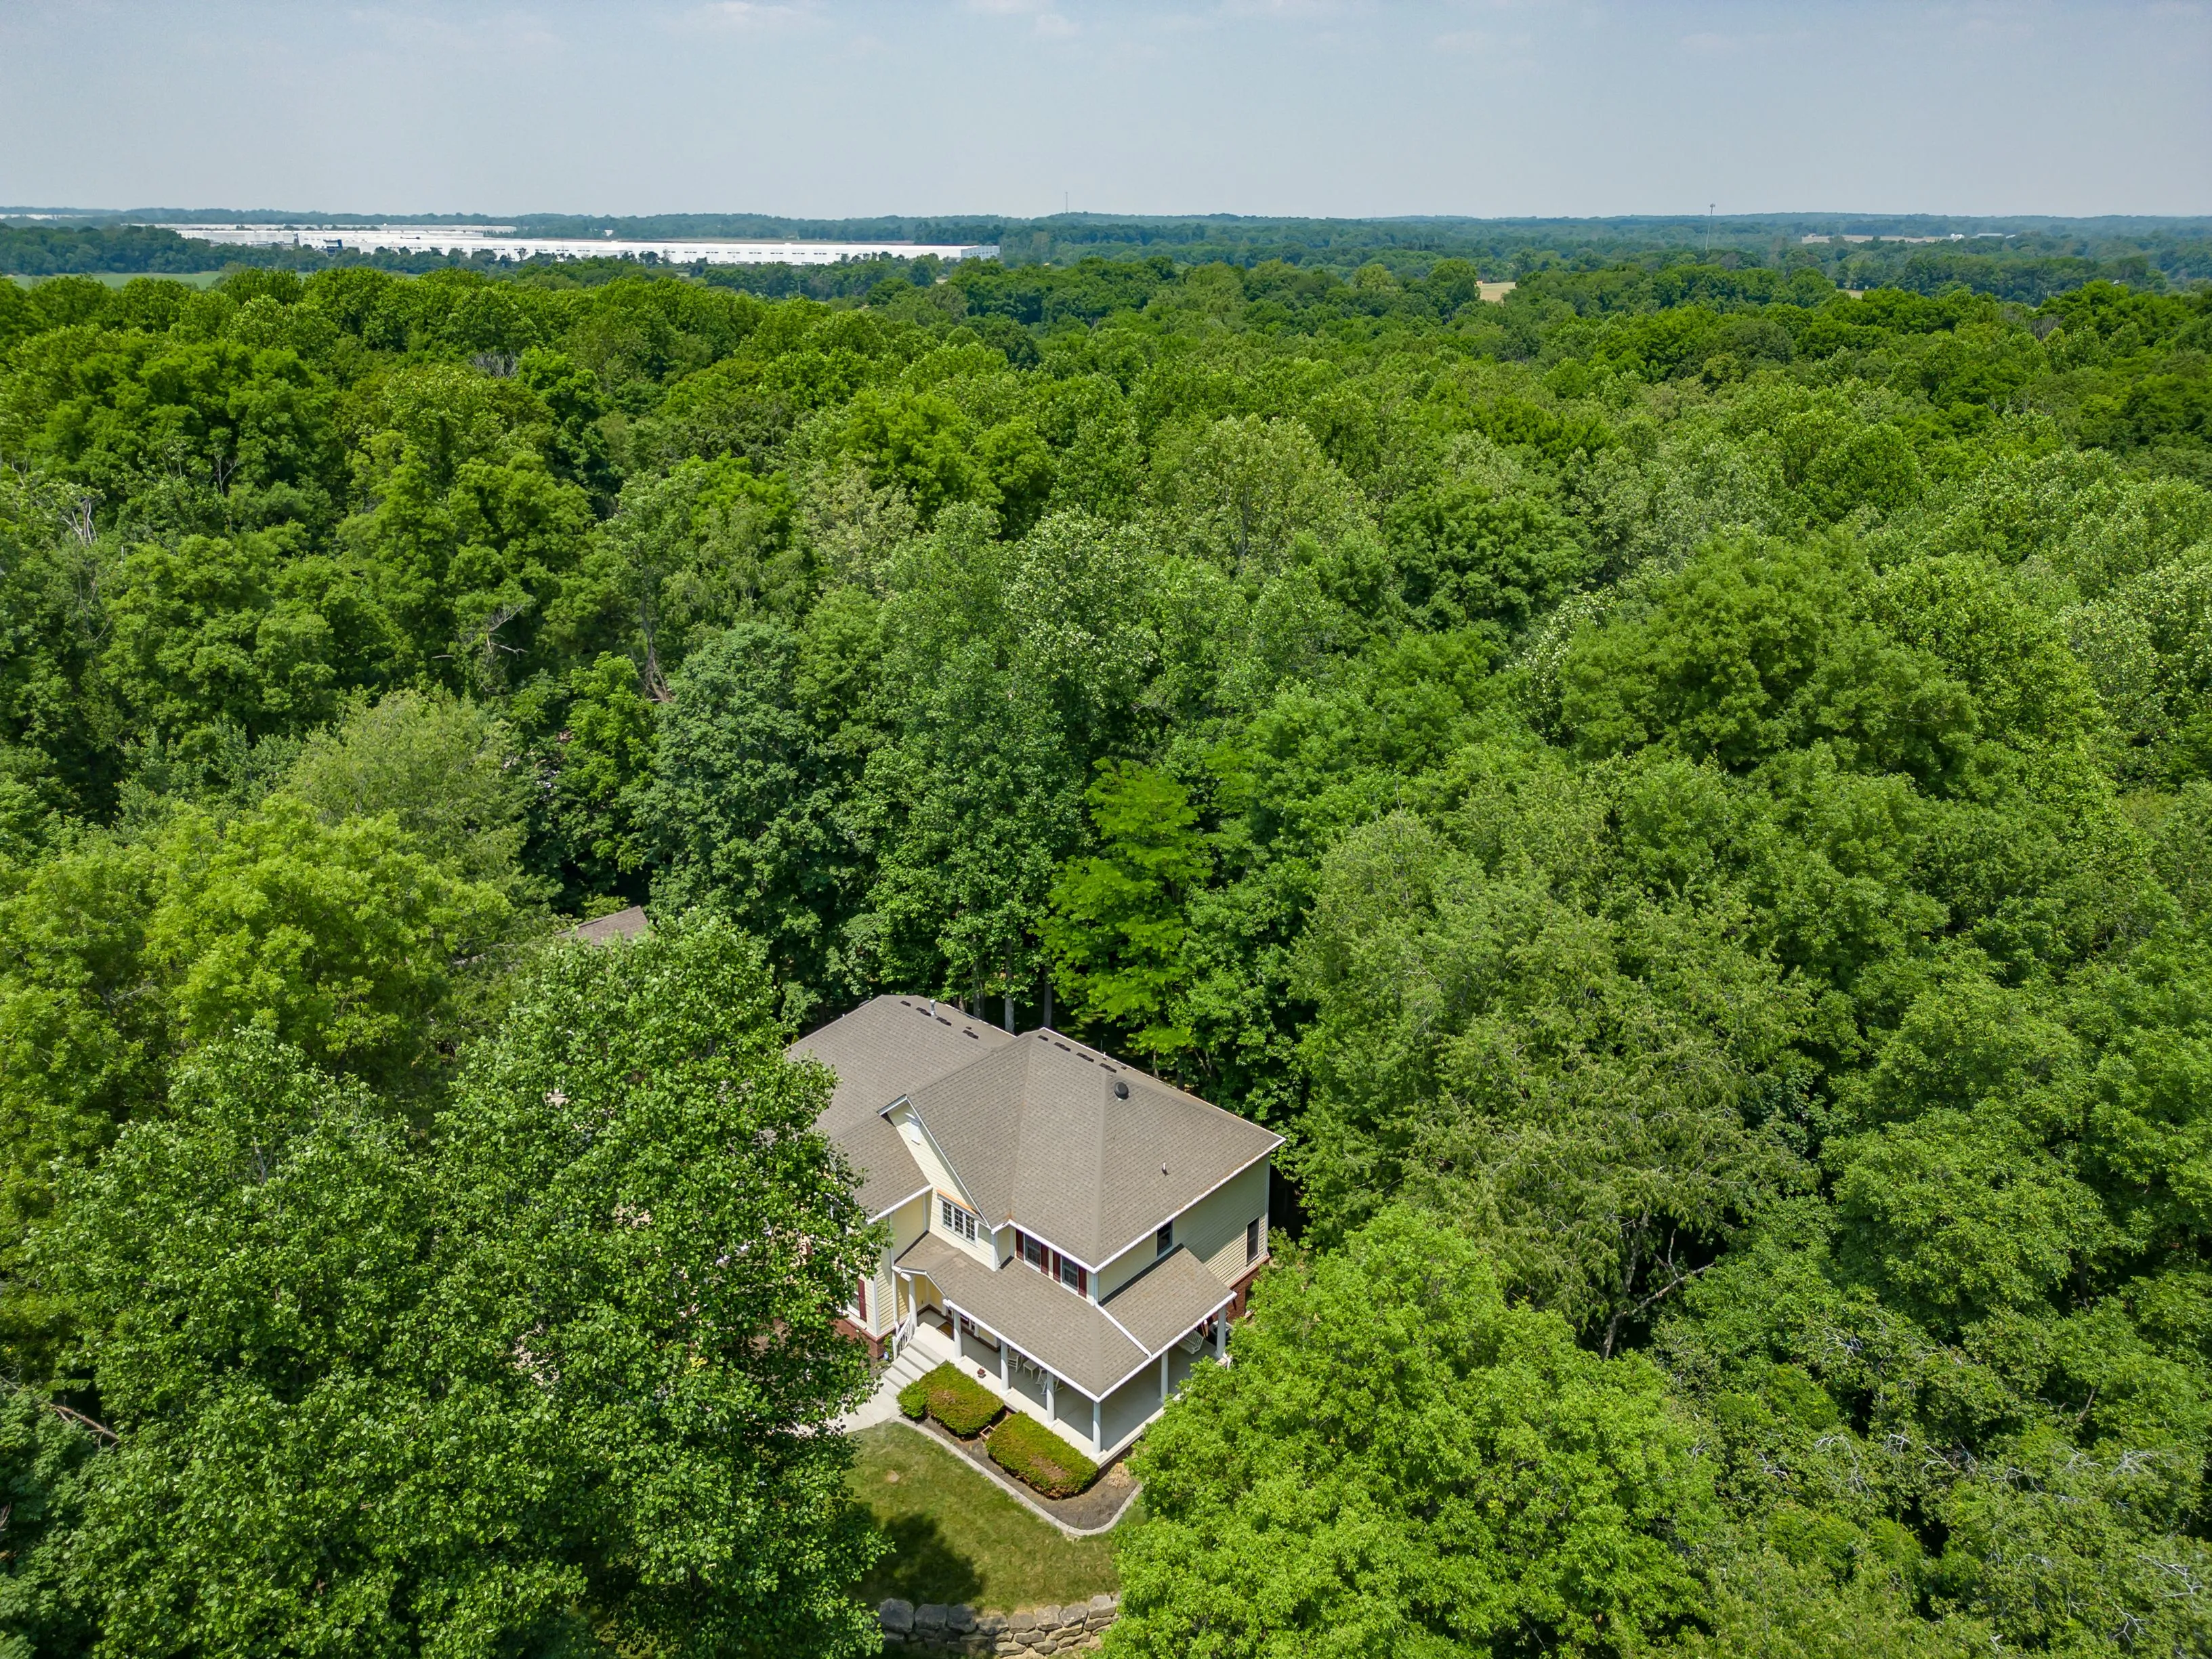 Aerial view of an isolated house surrounded by a dense green forest.